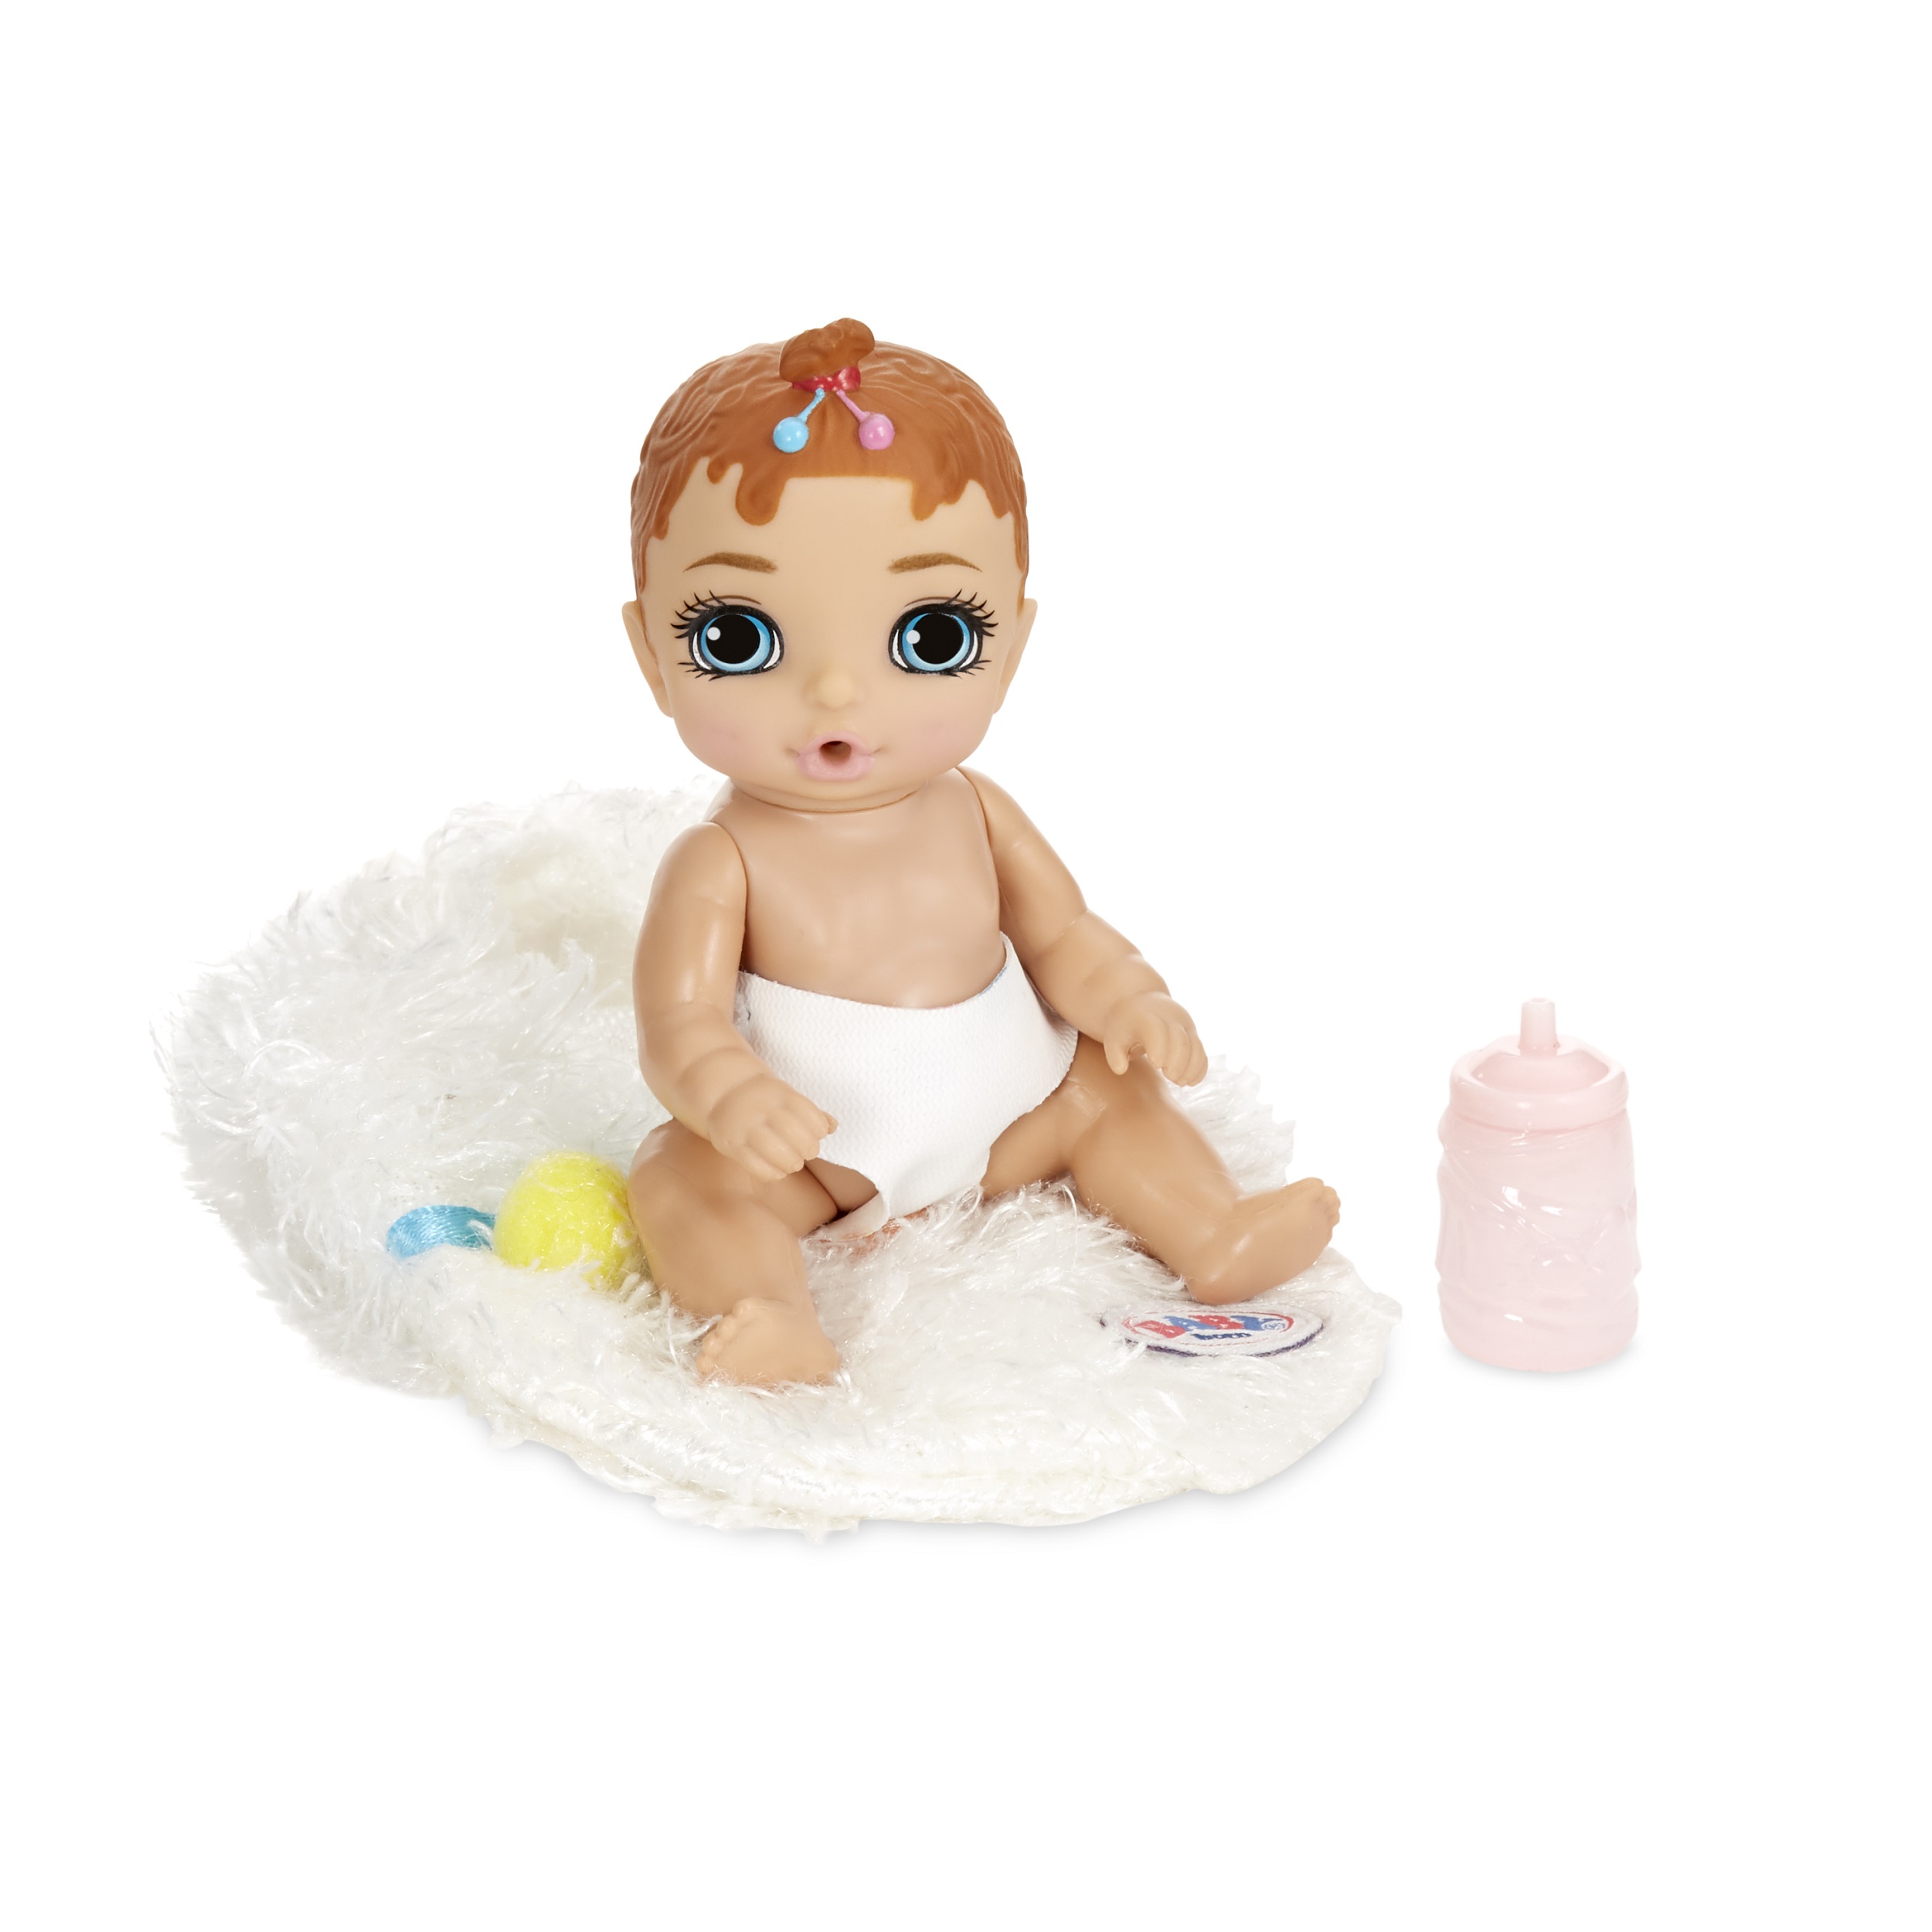 Baby Born Surprise Series 2-1 Collectible Babies with Color Change - image 4 of 6